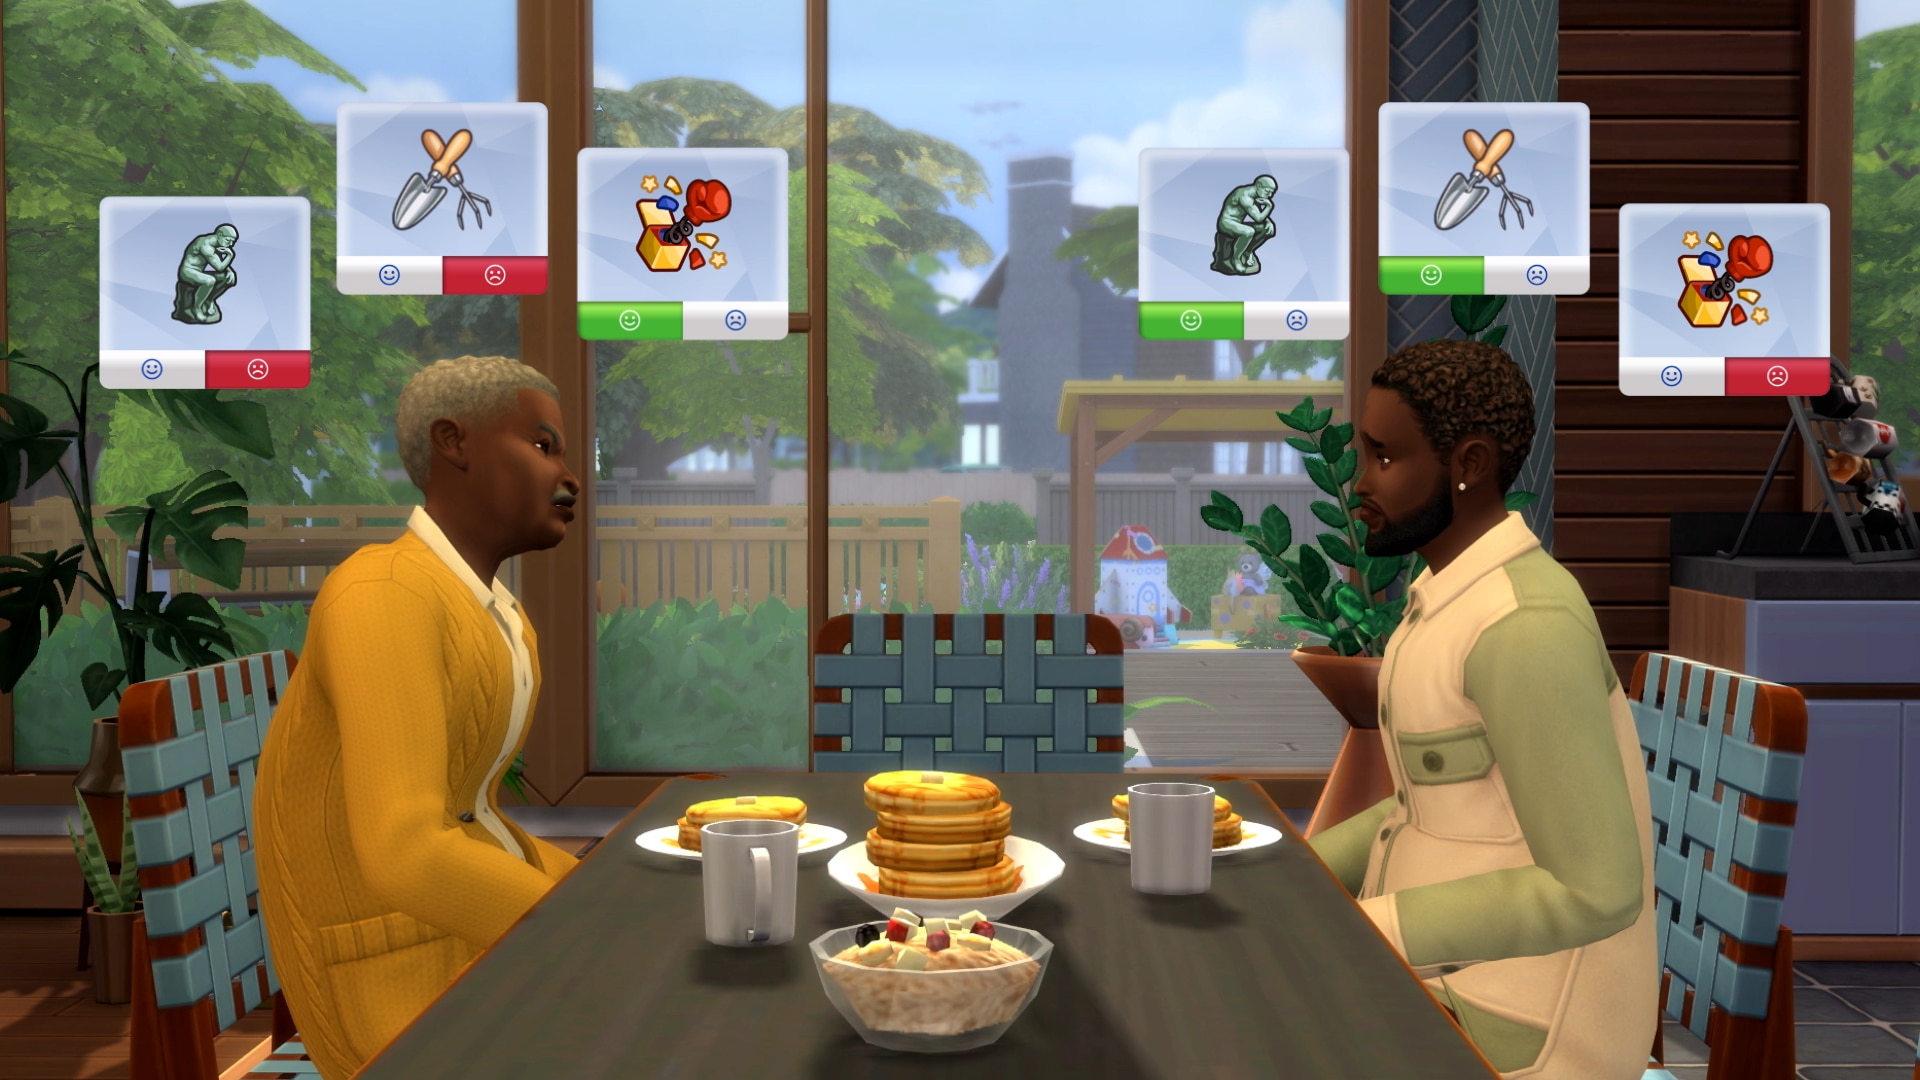 Explore new family dynamics in The Sims 4: Growing Together